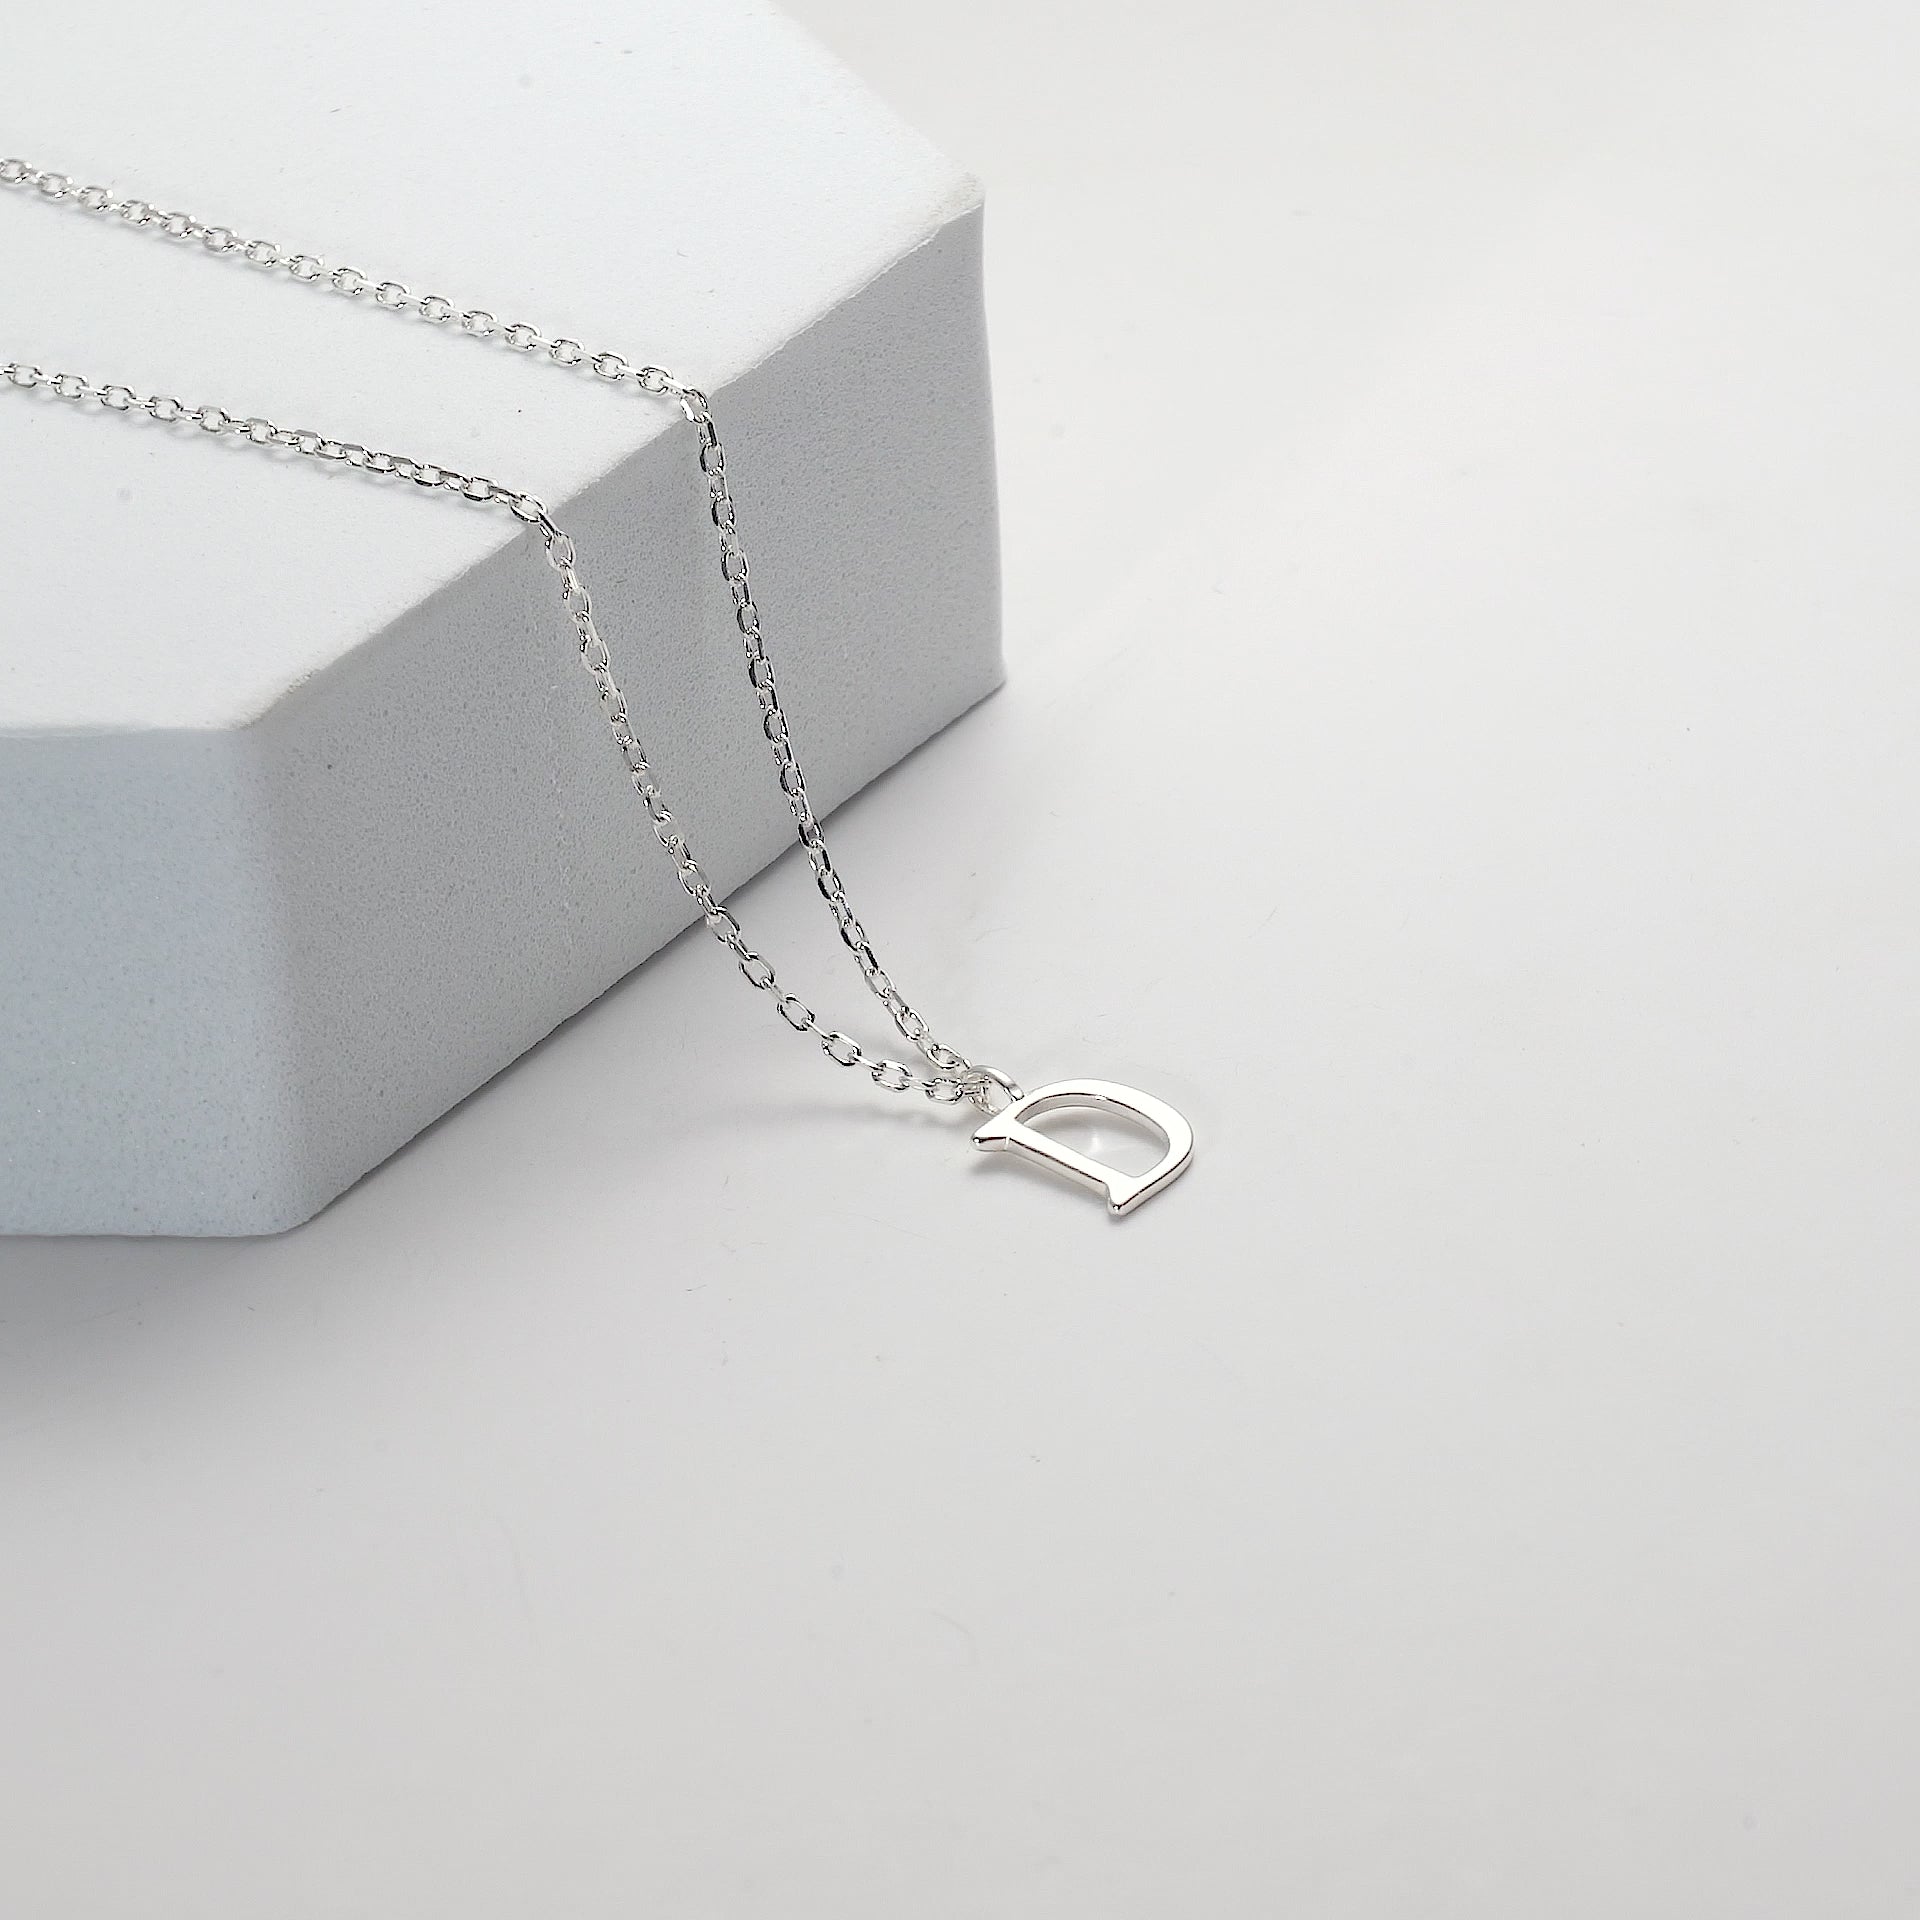 Sterling Silver Initial D Necklace